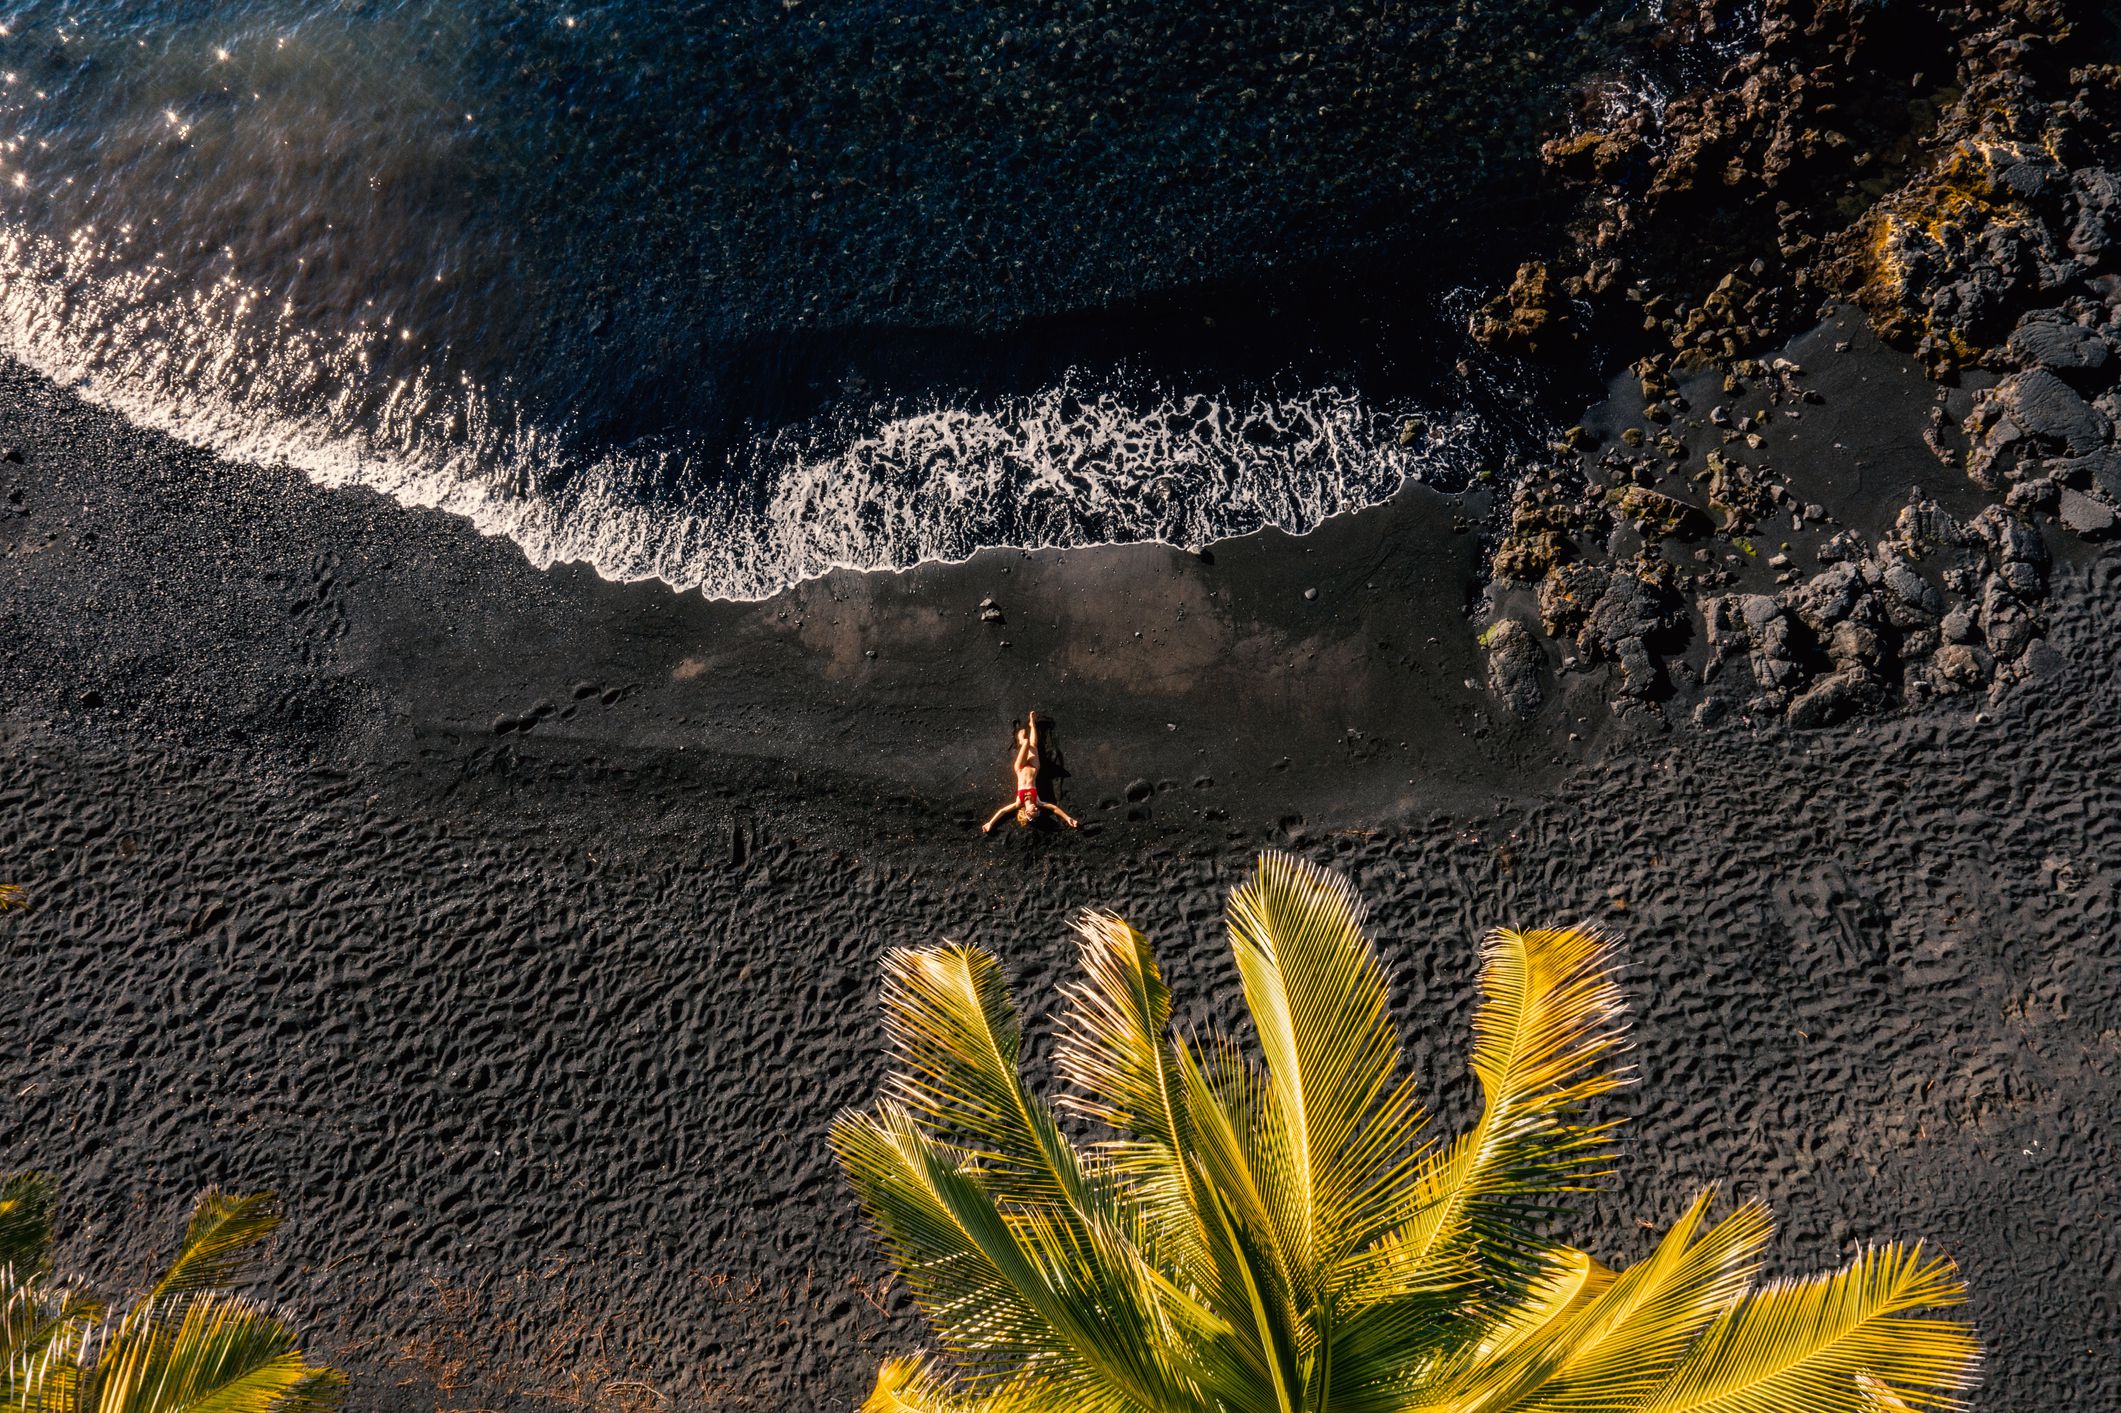 <p>Of course you need beach time, so why not head to the black sand beach of Waiʻānapanapa State Park? It’s a great selfie spot. The black color comes from eroded rock mixed with sand.</p><p>You can also picnic, swim, and snorkel there. If you’re <a href="https://www.sofi.com/learn/content/tips-save-money-traveling-with-pets/">traveling with a pet</a>, know that the park allows leashed dogs, so it can be a good place to explore together.</p><p>To combat the throngs of visitors, the park now requires reservations, and entry is $5 per person plus a $10 parking fee. </p>